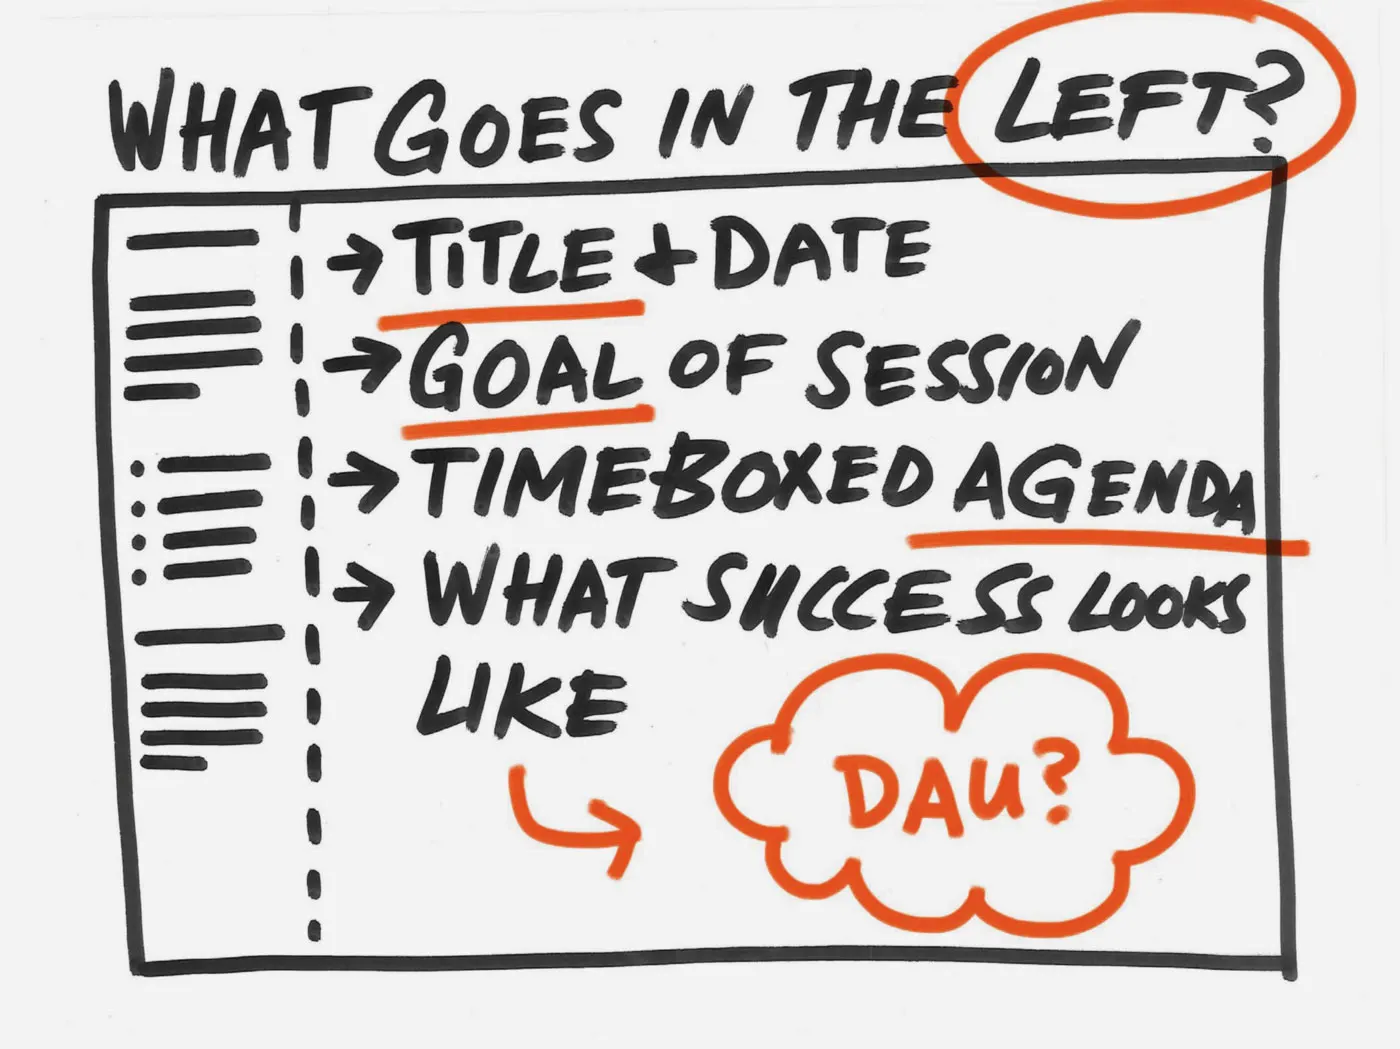 Black marker sketch with heading "What goes in the left?" and a list: Title + date. Goal of session. Timeboxed agenda. What success looks like.